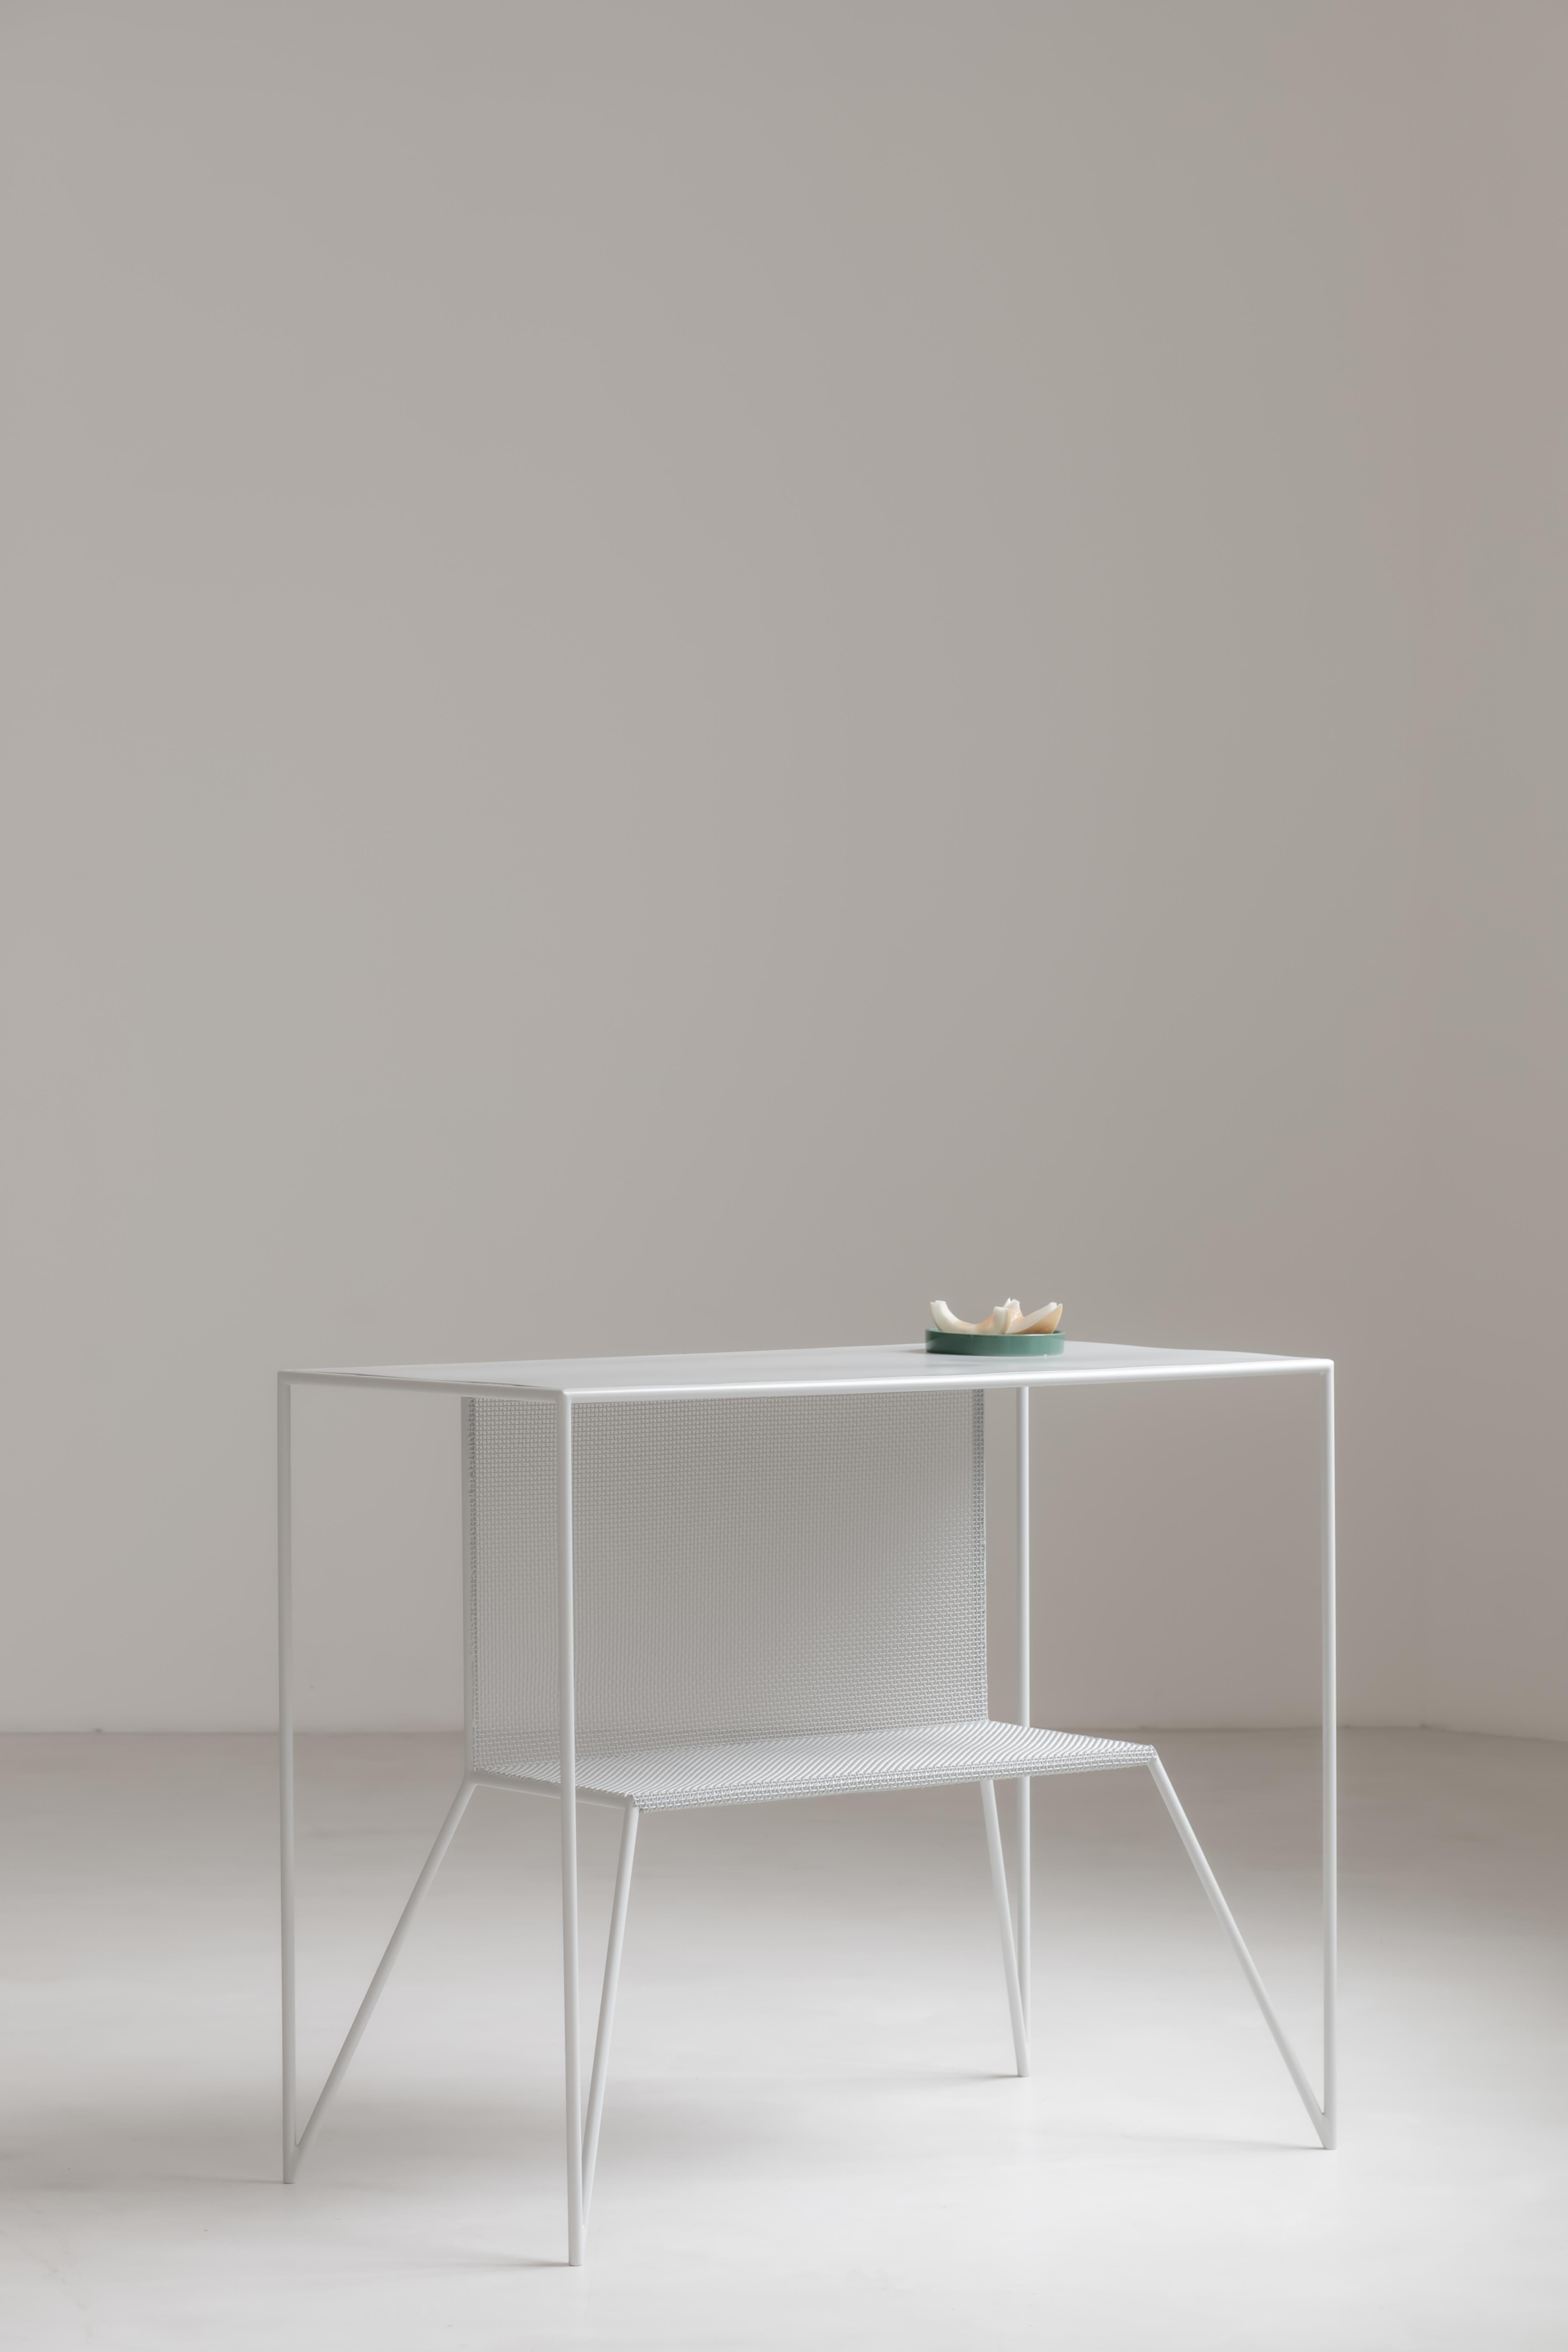 Way Up, Way Out Desk Bar by Maria Scarpulla
Dimensions: D130 x W70 x H110 cm
Materials: lacquered steel frame. And a integrated hand woven steel structure.
Available in different colours: off white, light grey or available on demand.

'